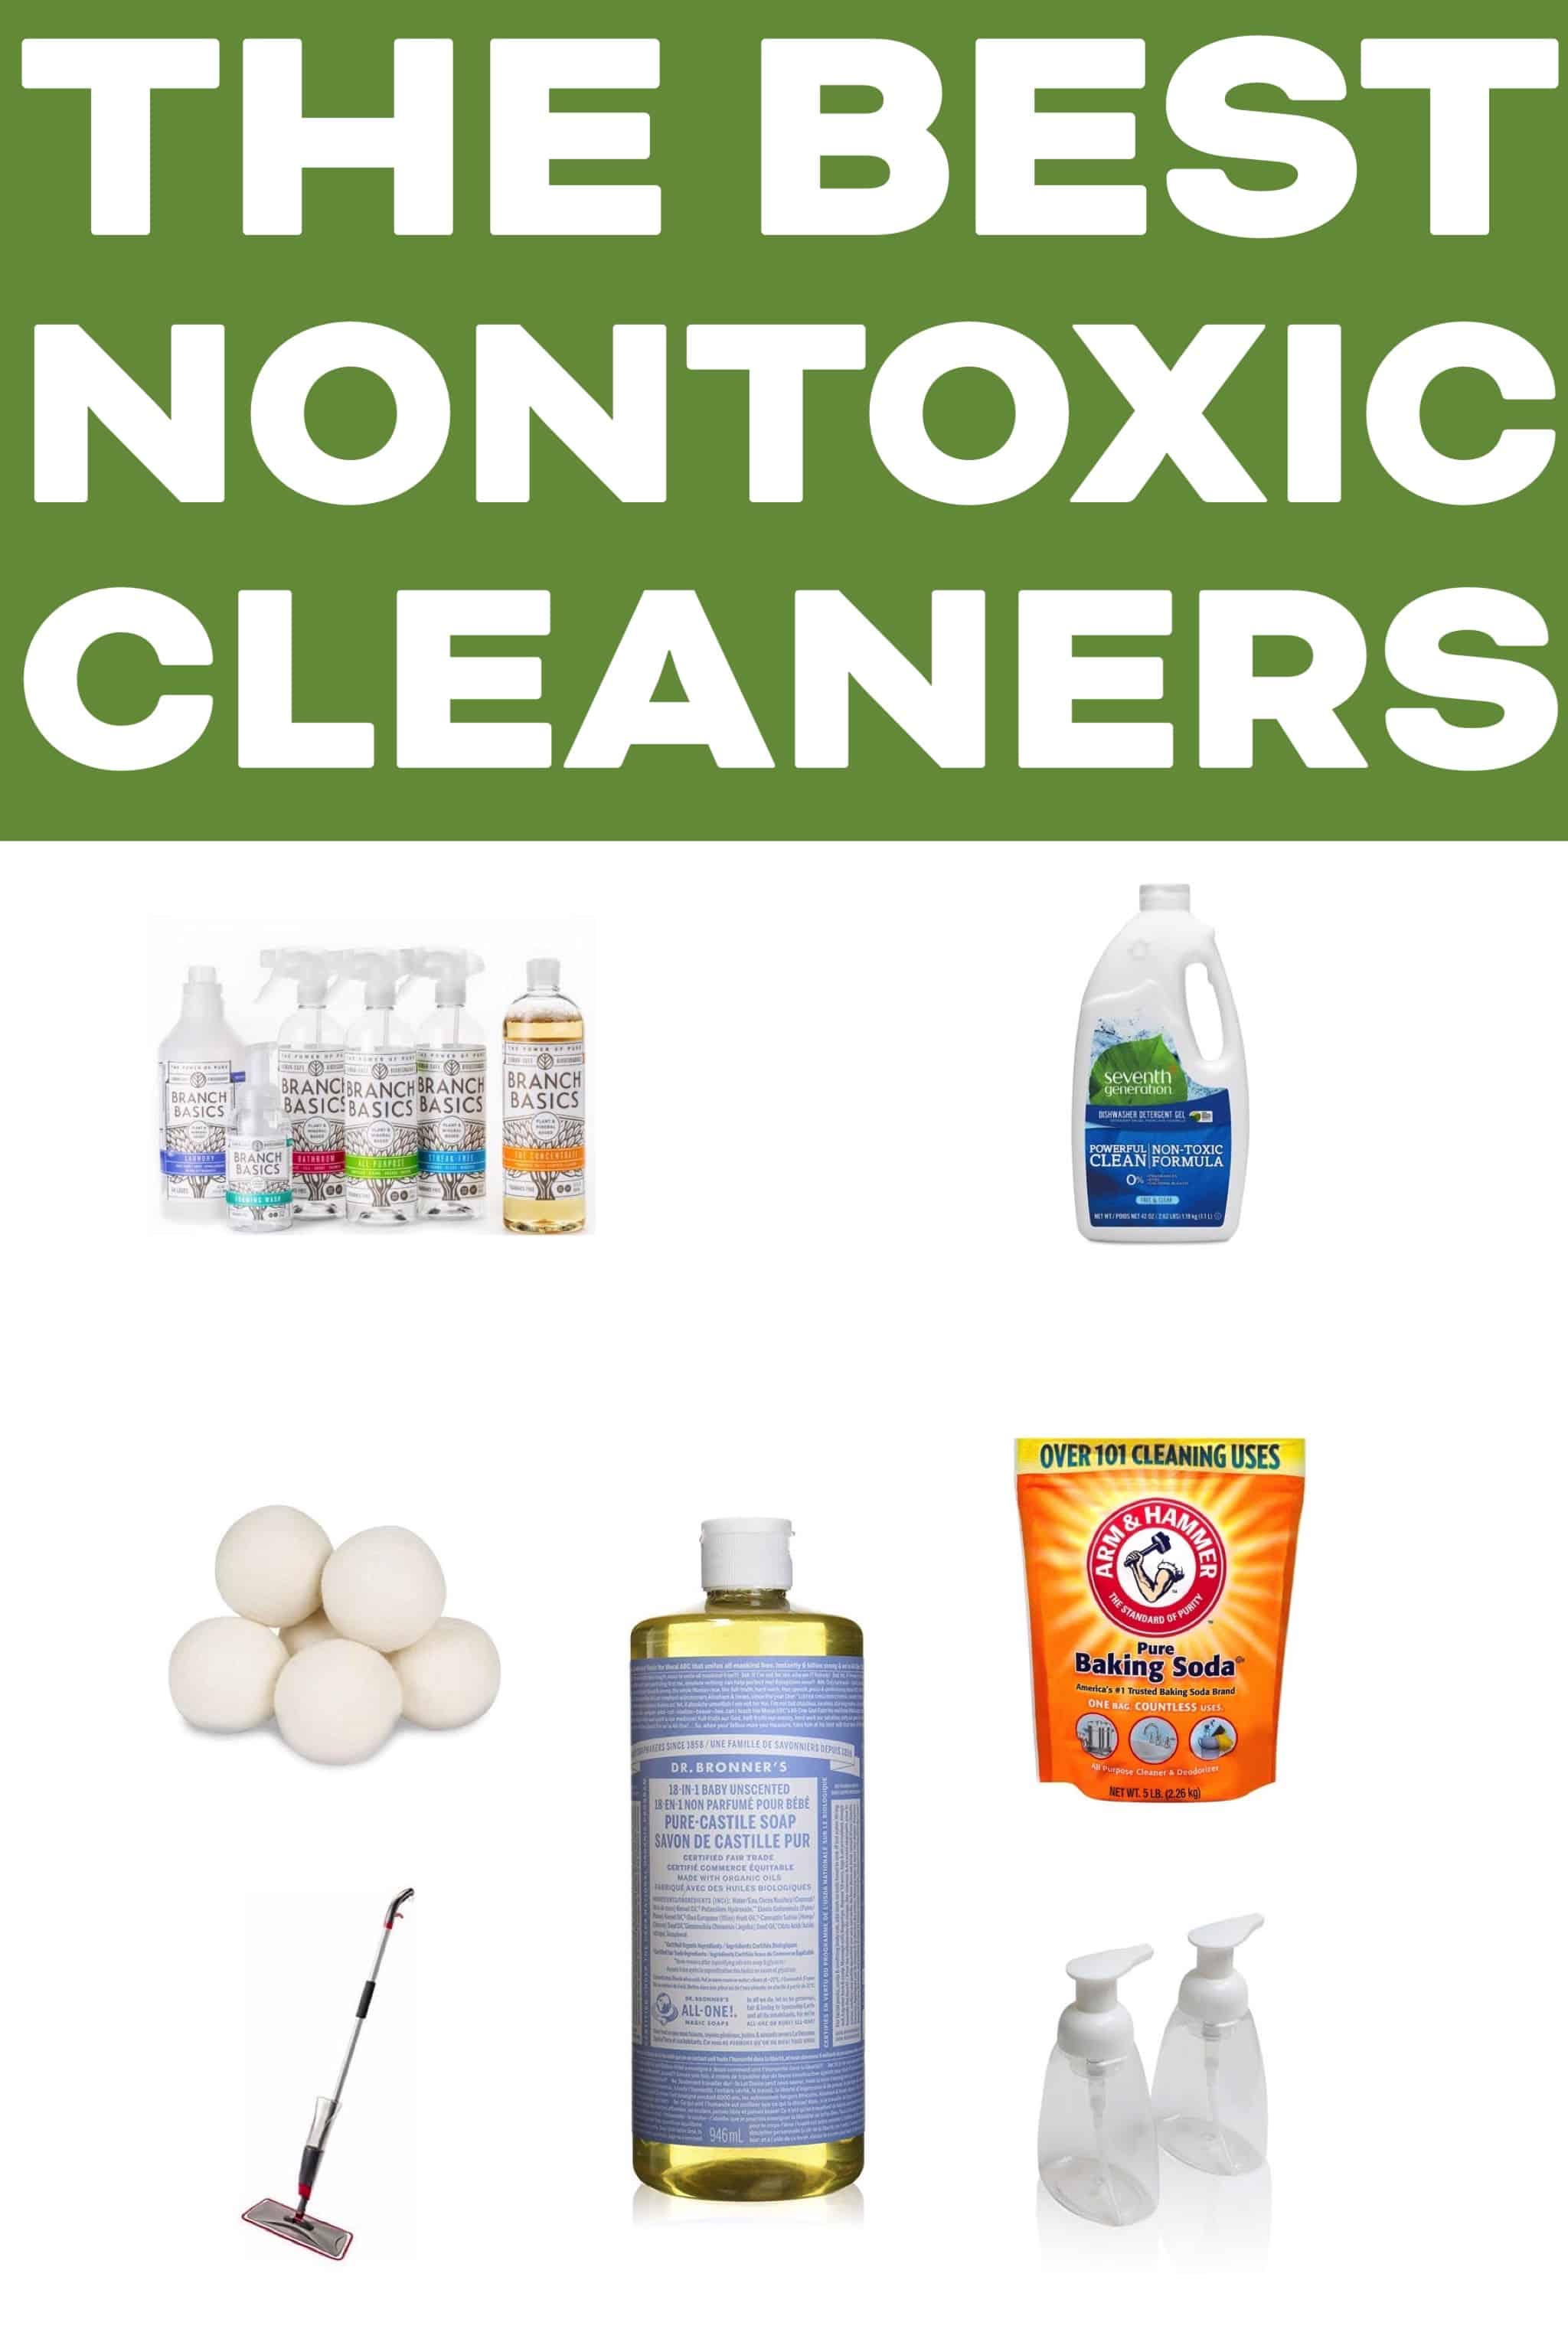 https://www.tasteslovely.com/wp-content/uploads/2019/03/My-Favorite-Non-Toxic-Household-Cleaning-Products-tasteslovely.com_-1.jpg